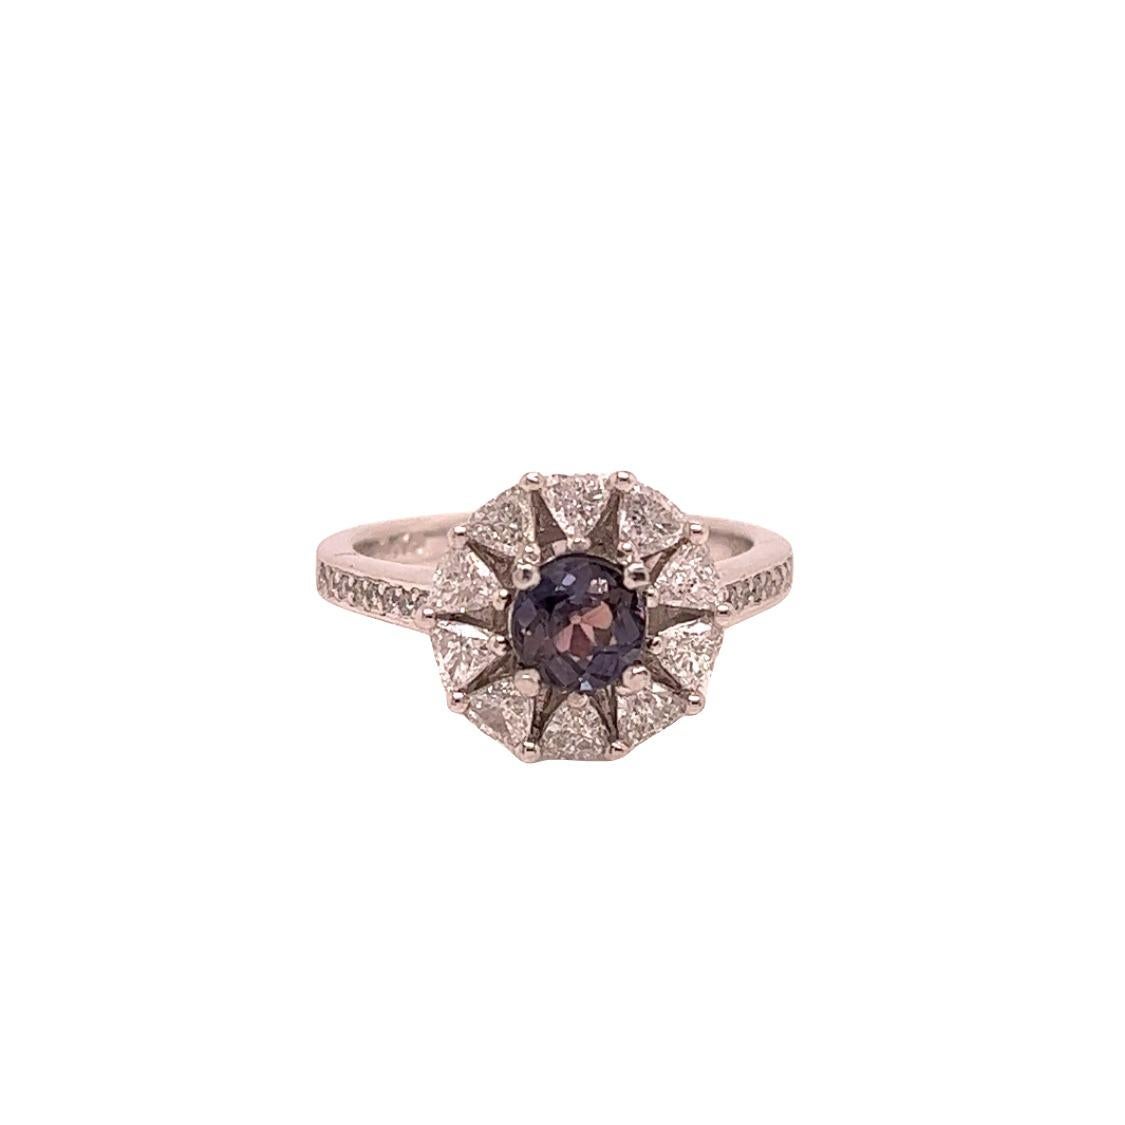 This is a gorgeous natural AAA quality round Alexandrite surrounded by a dainty diamond halo that is set in a vintage platinum setting. This ring features a  natural 0.76 round alexandrite that is certified by the Gemological Institute of America